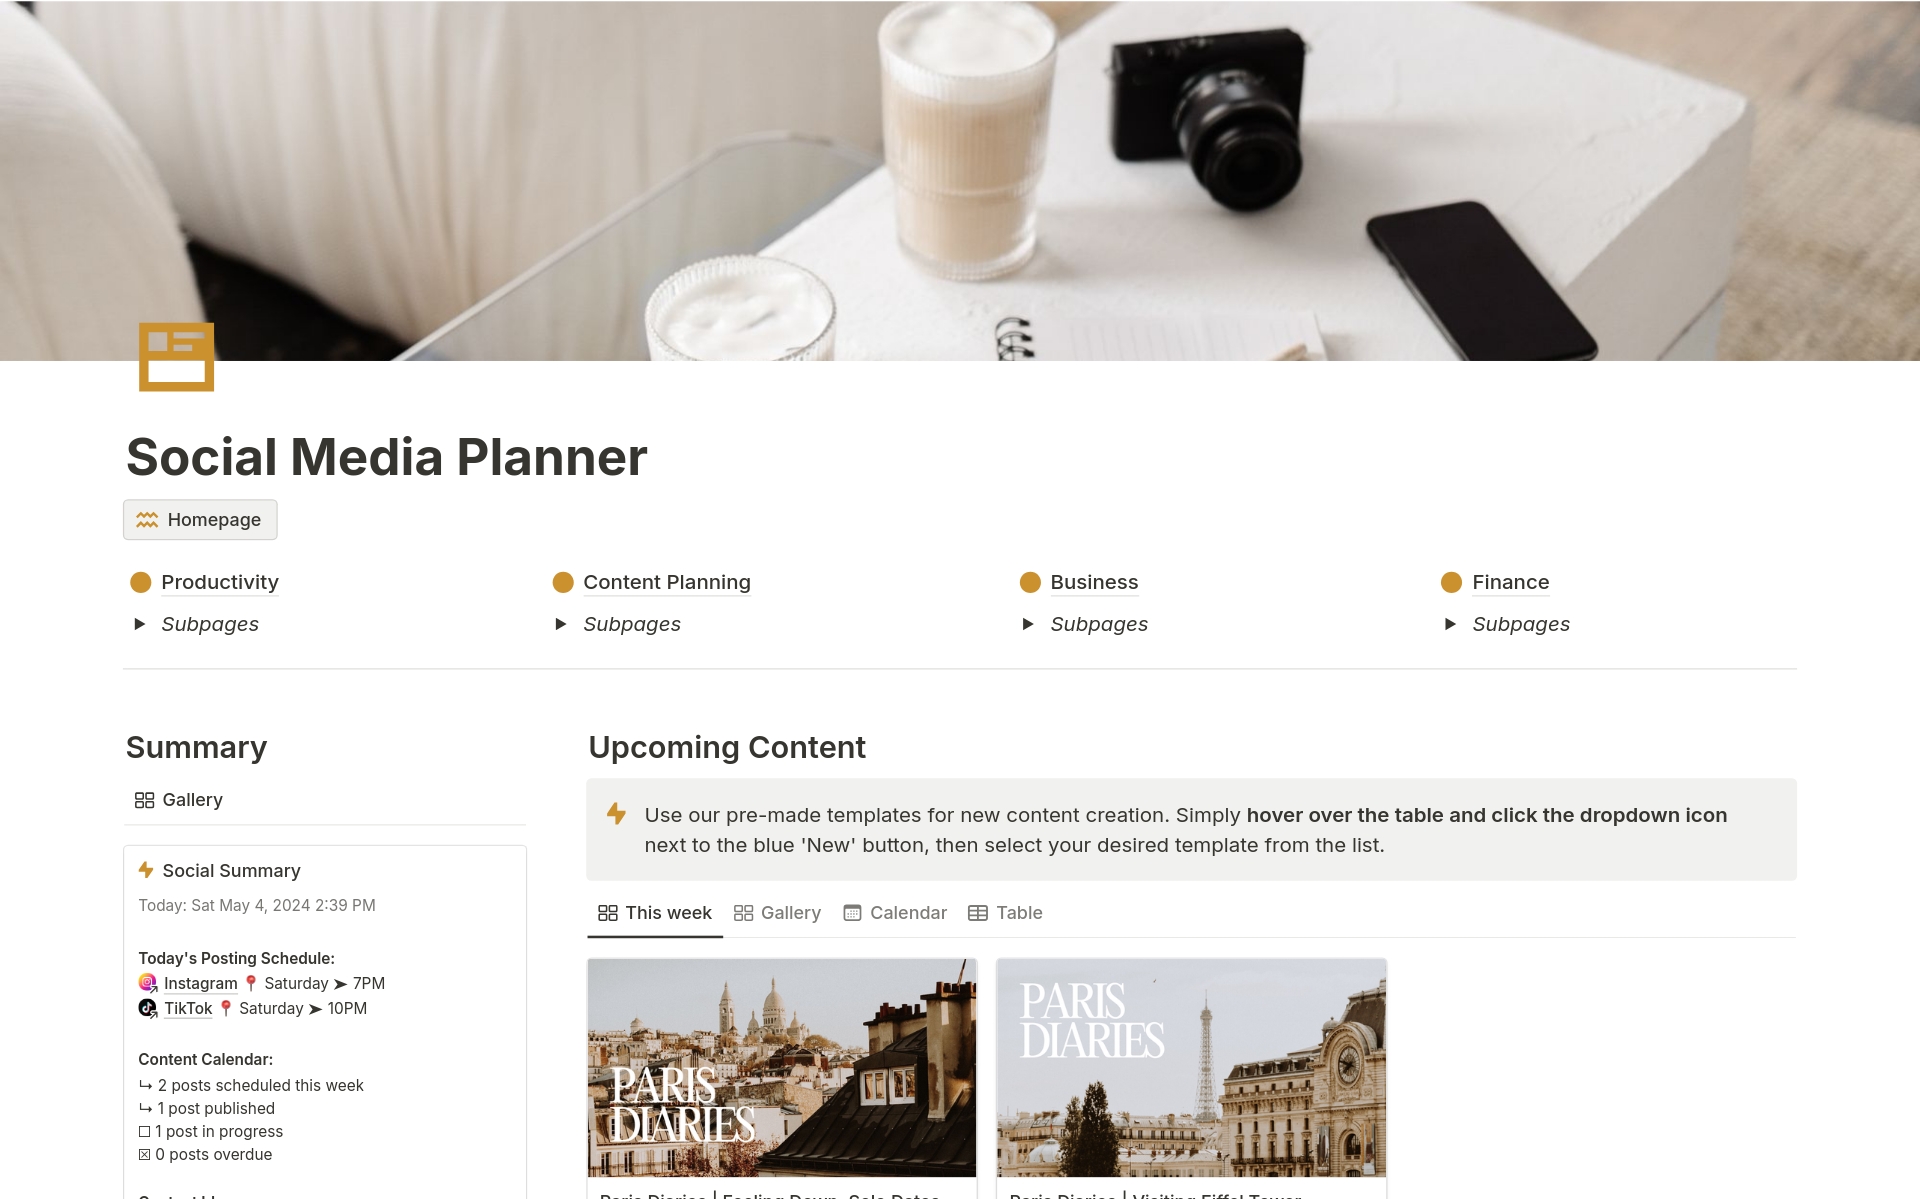 An all-in-one Social Media Template for planning, organizing, and tracking your content effortlessly.